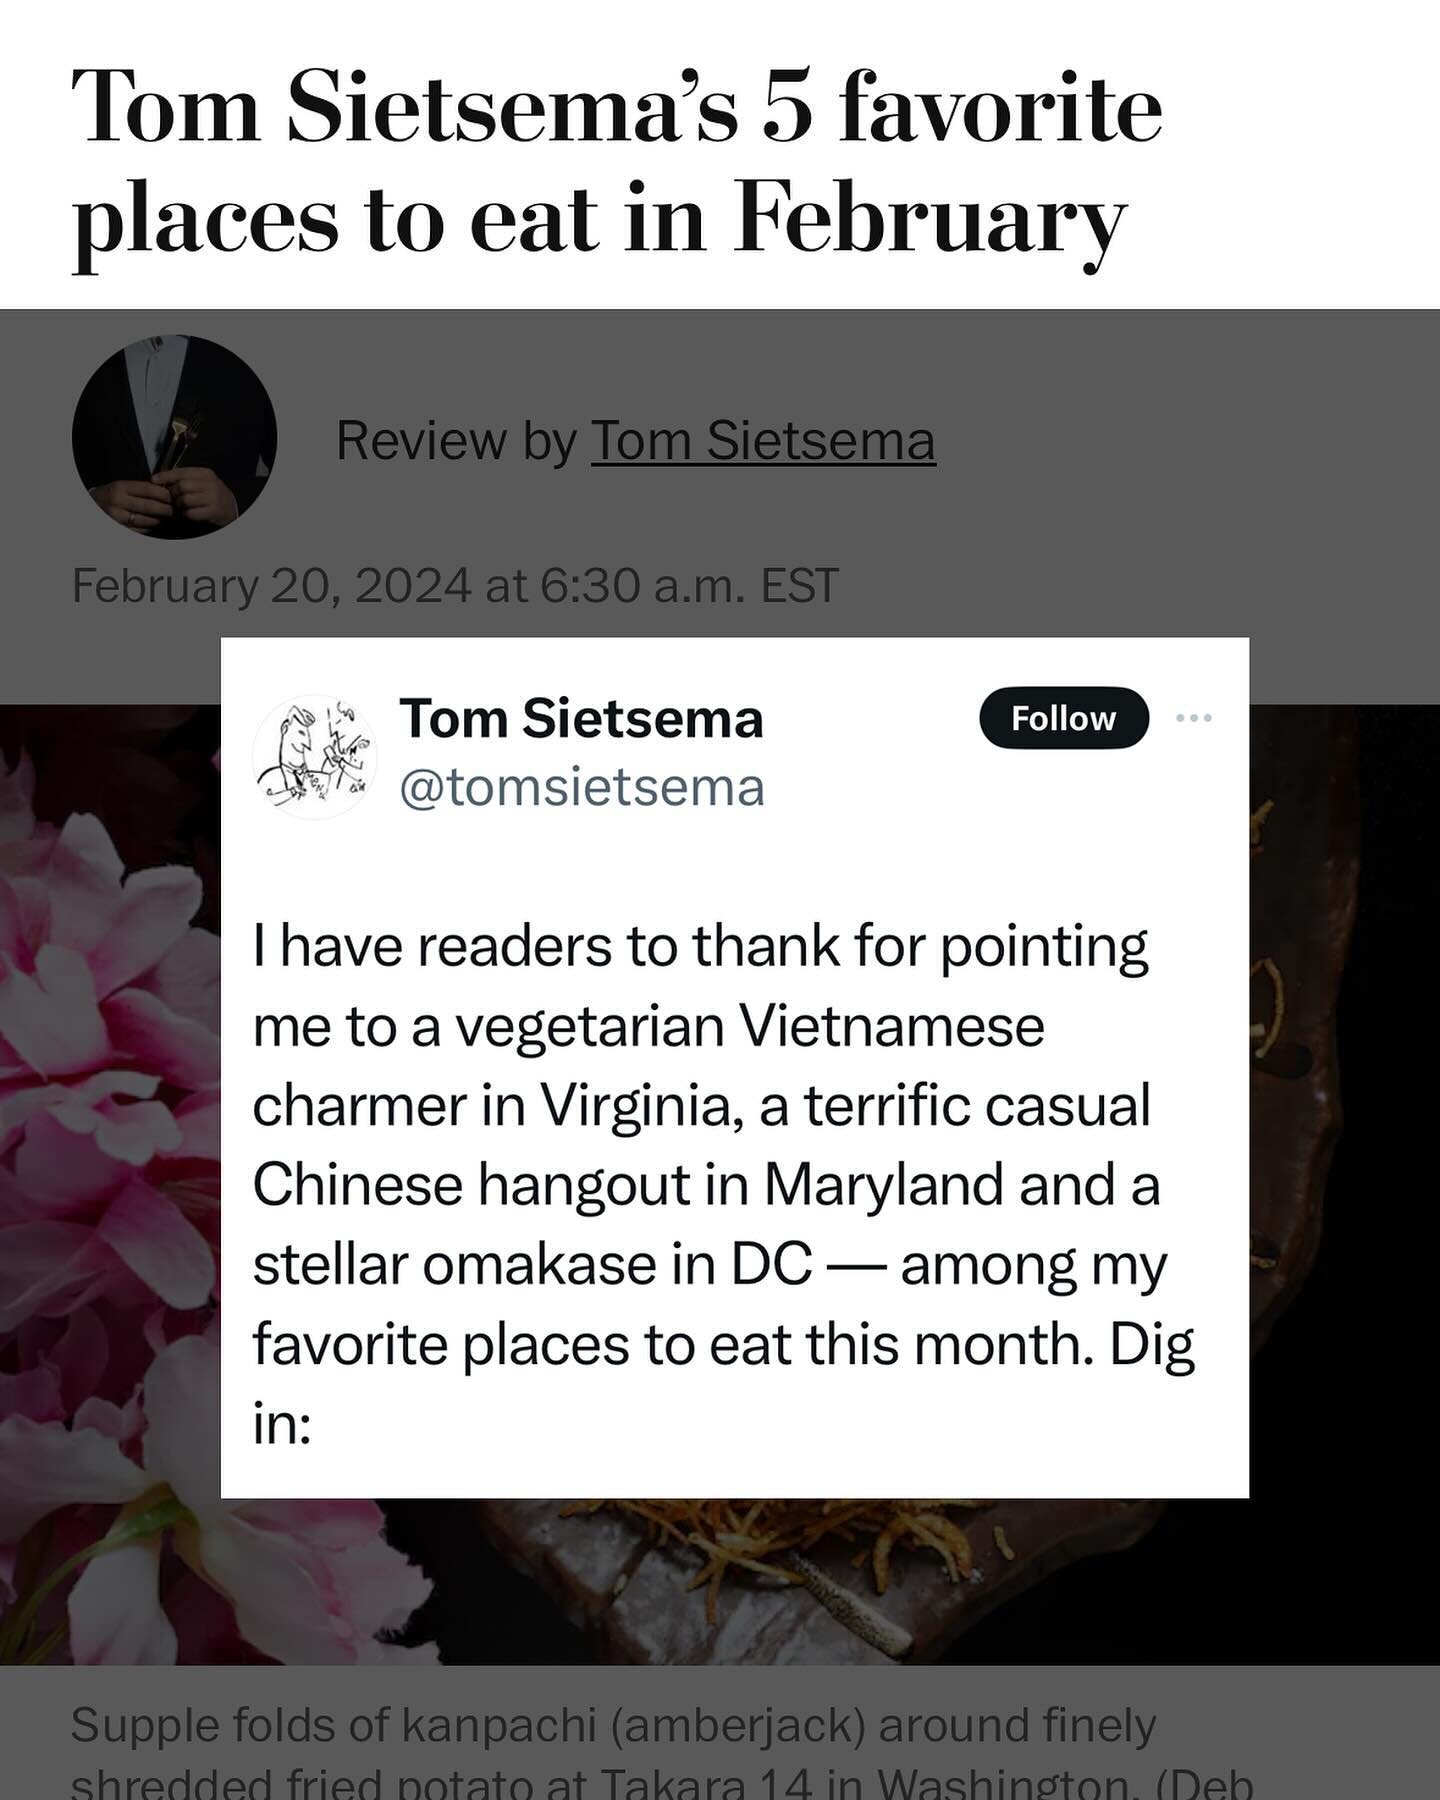 Wow, we are in the Washington Post again! Thank you @tomsietsema for including Chay on your 5 favorite places to eat in February! We have so many others to thank for this including @deblindsey for the gorgeous photos and the reader who tipped Tom off